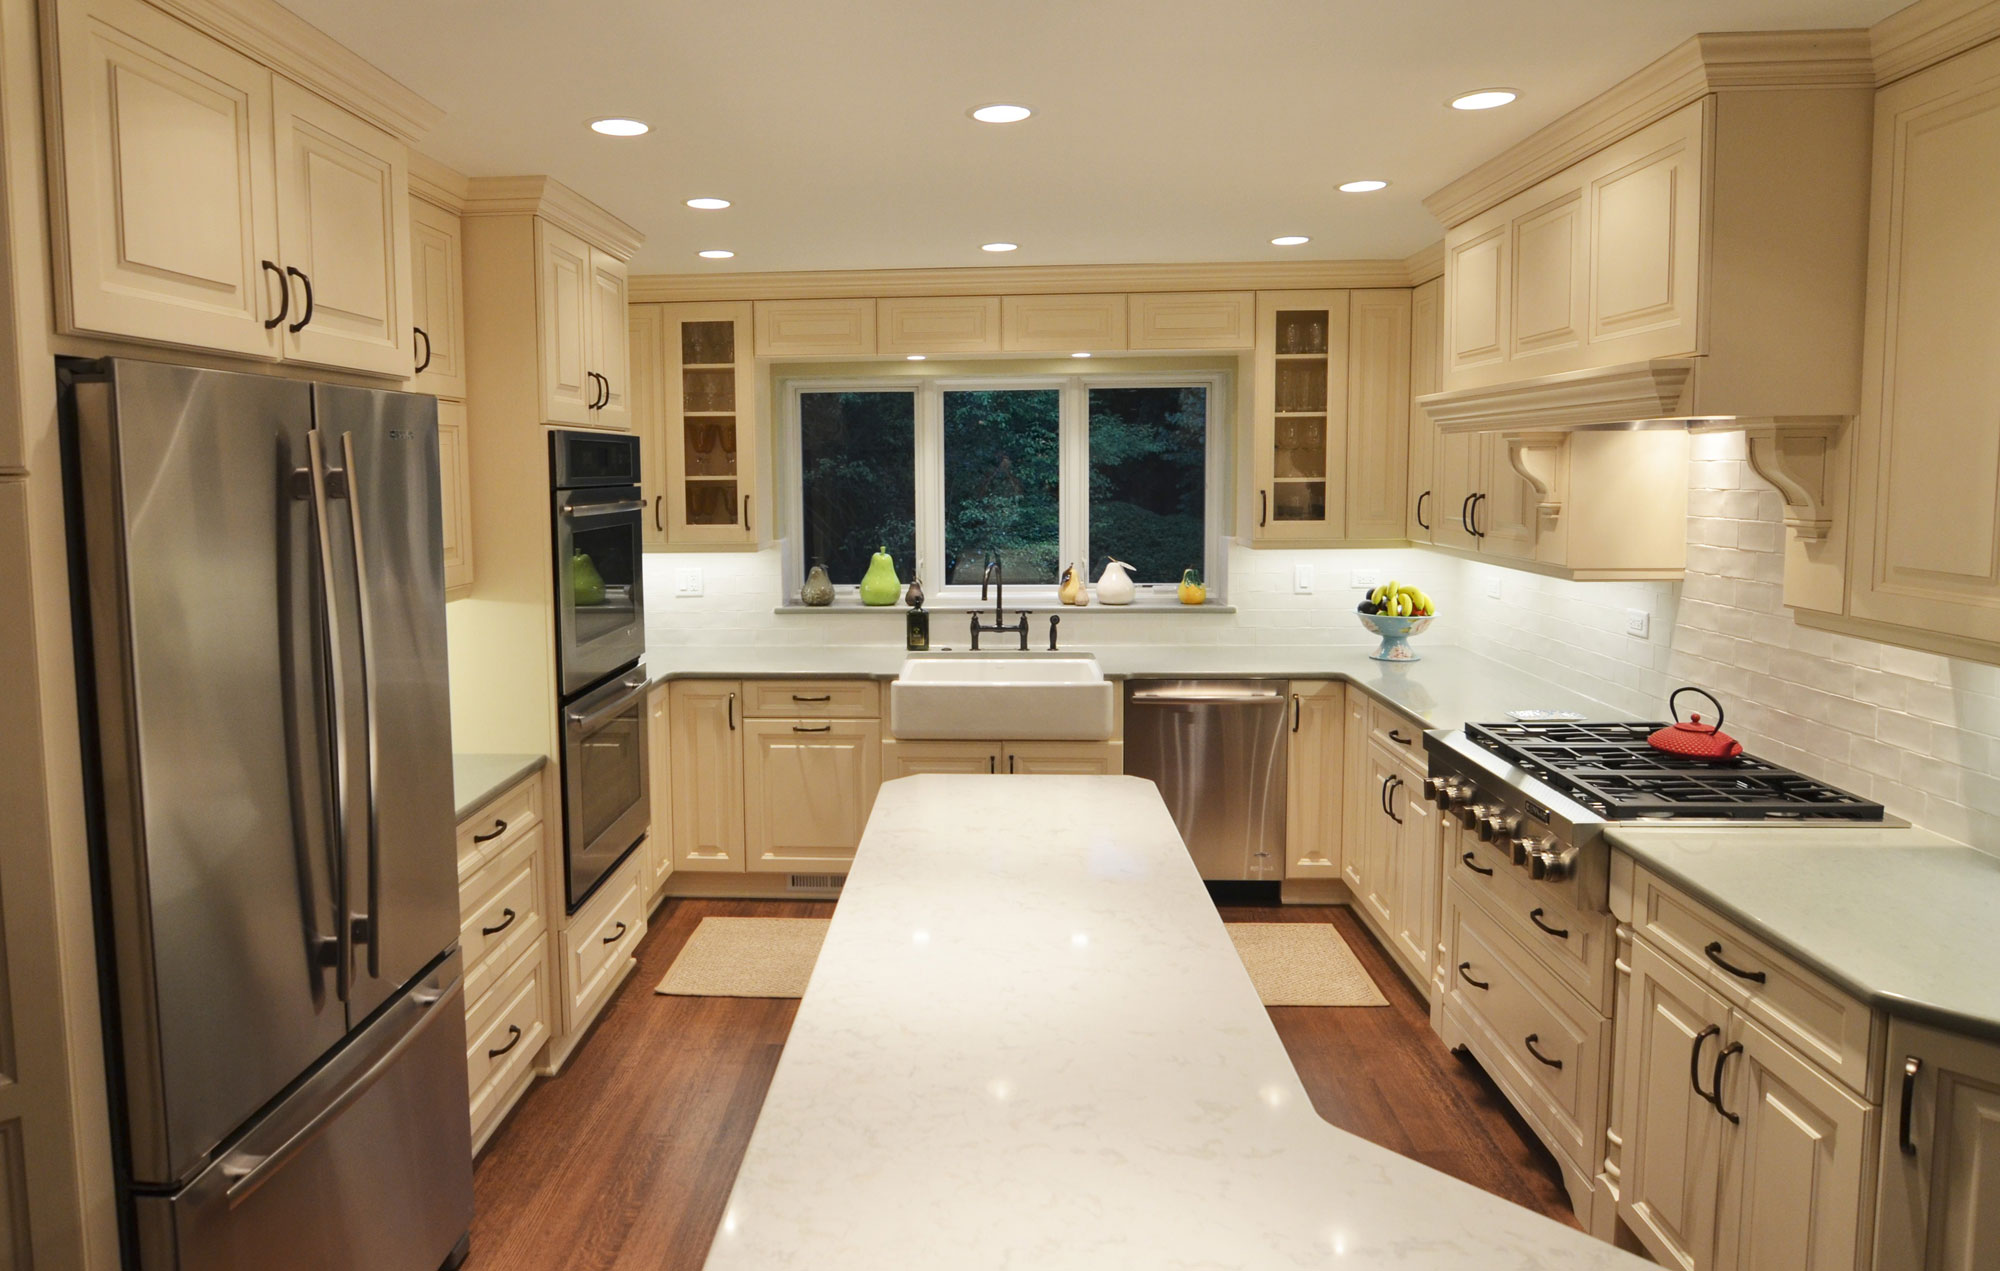 Kitchen remodeling in Naperville, IL. Green island design in traditional home kitchen.